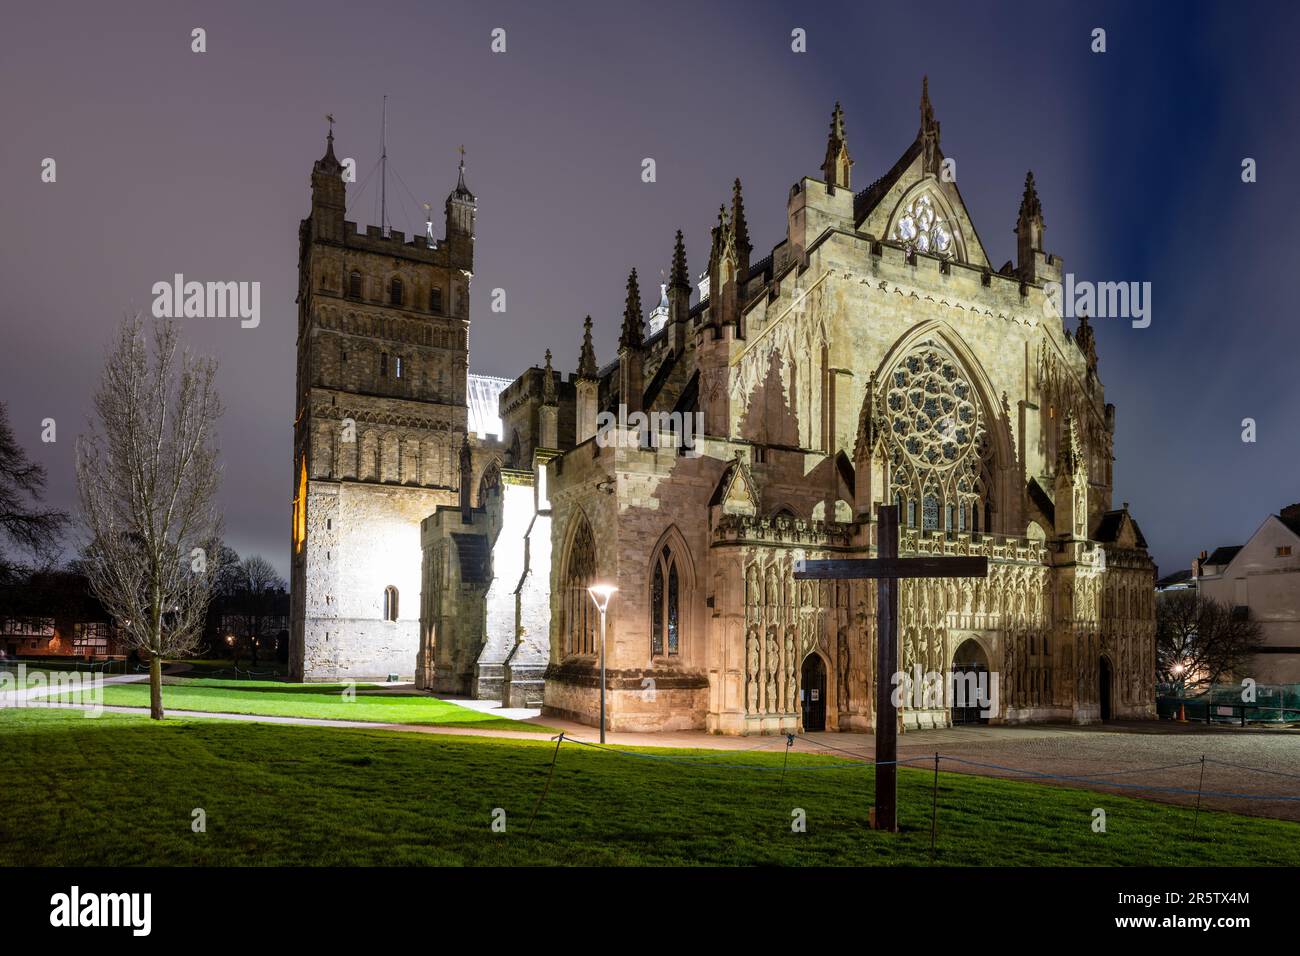 The Norman and medieval Cathedral of St Peter is lit at night in Exeter, Devon. Stock Photo